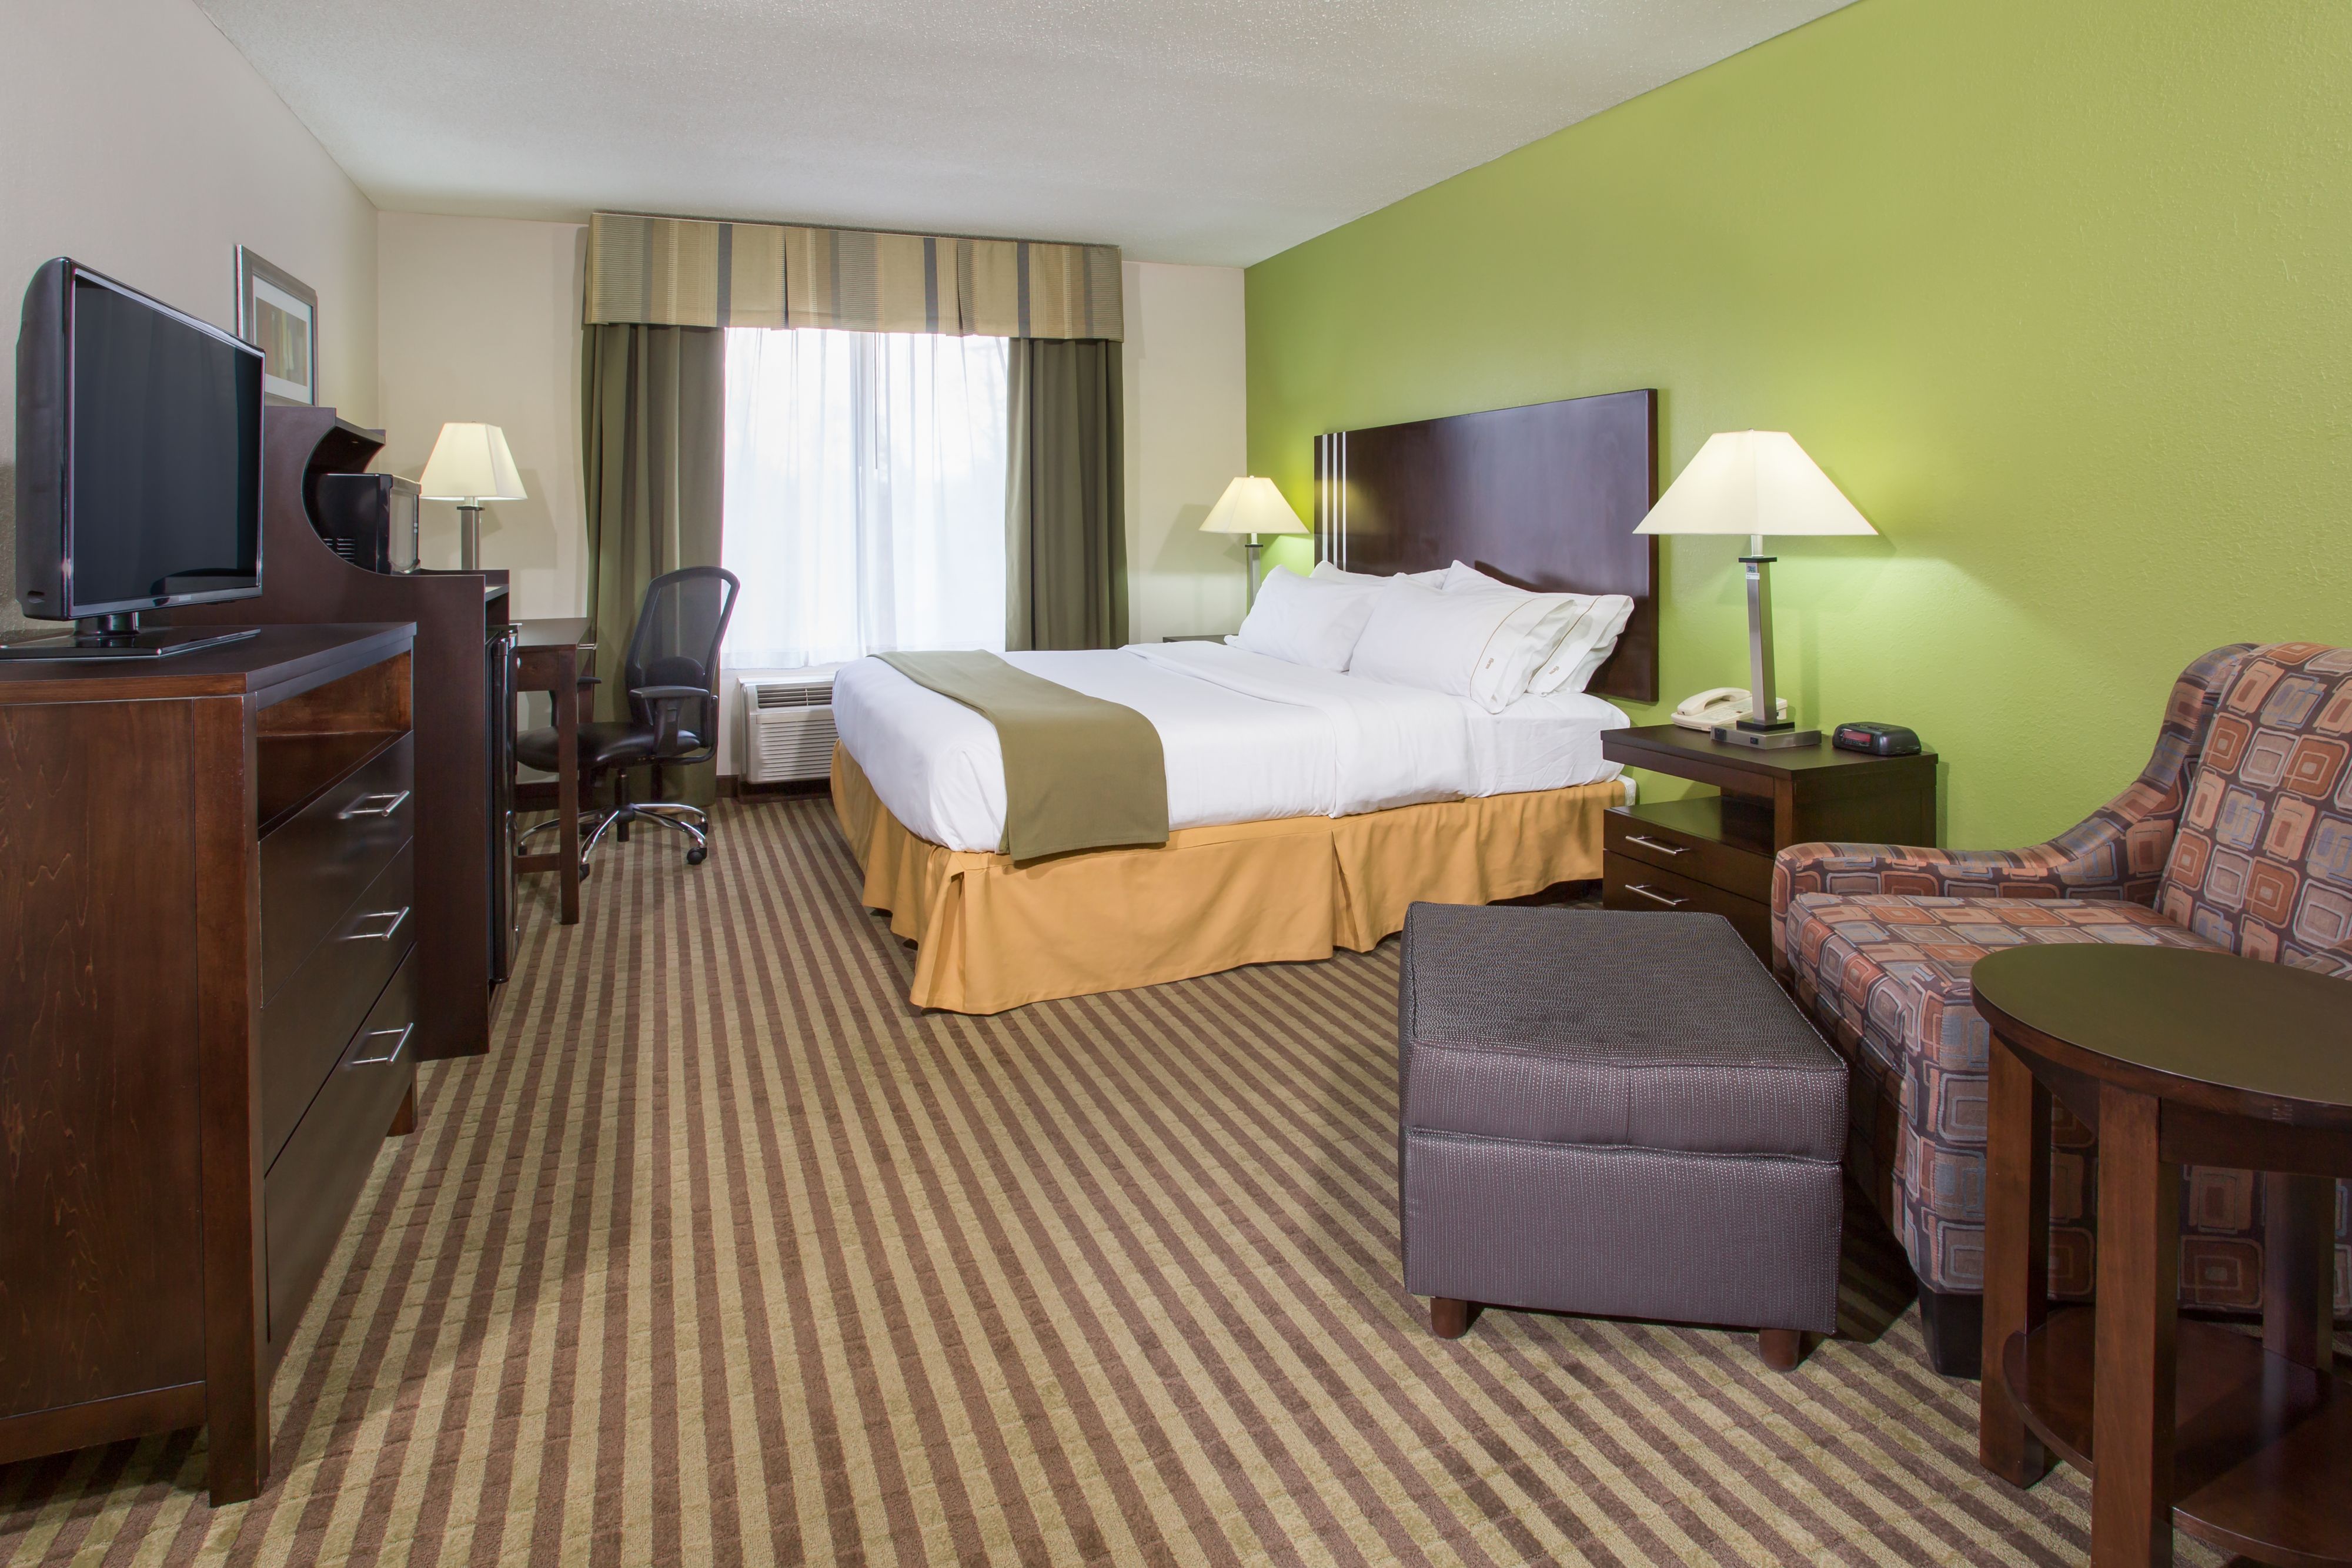 holiday-inn-express-and-suites-tell-city-3865072021-original.jpg